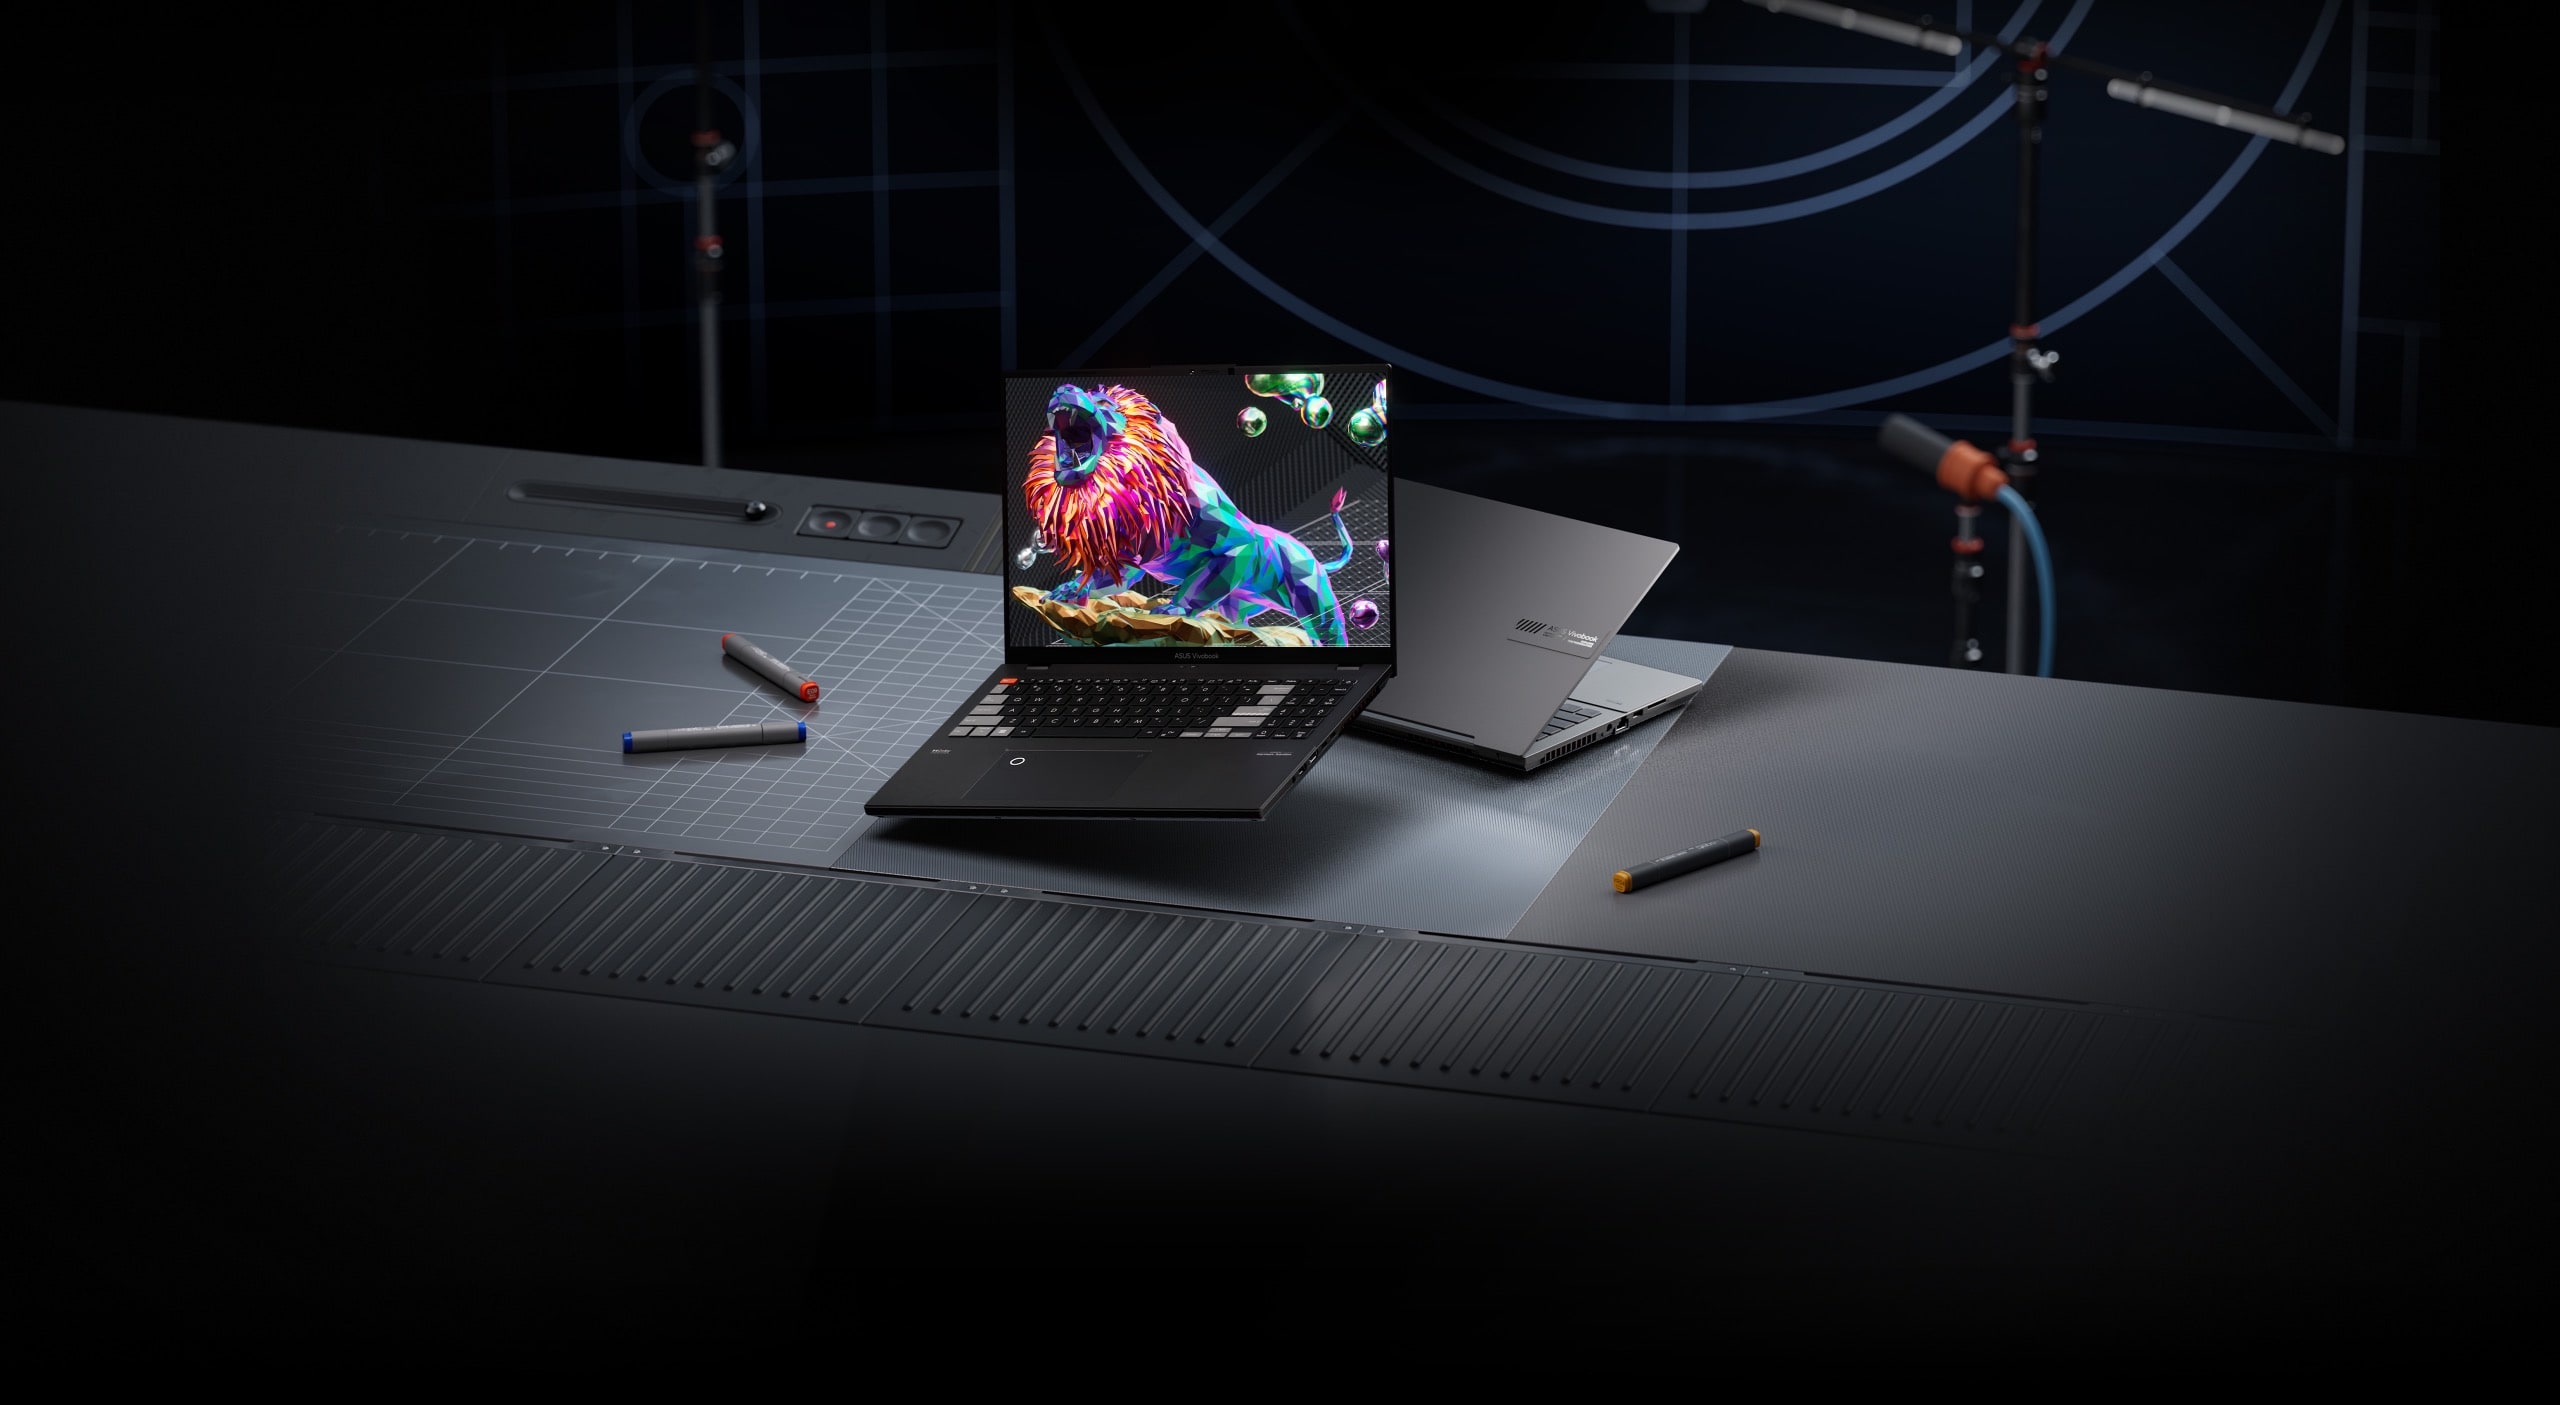 A black and silver 华硕无畏Pro16 2023 旗舰版 (K6604) model is shown on a recording studio desk, with the black laptop in-screen showing a lion roaring.